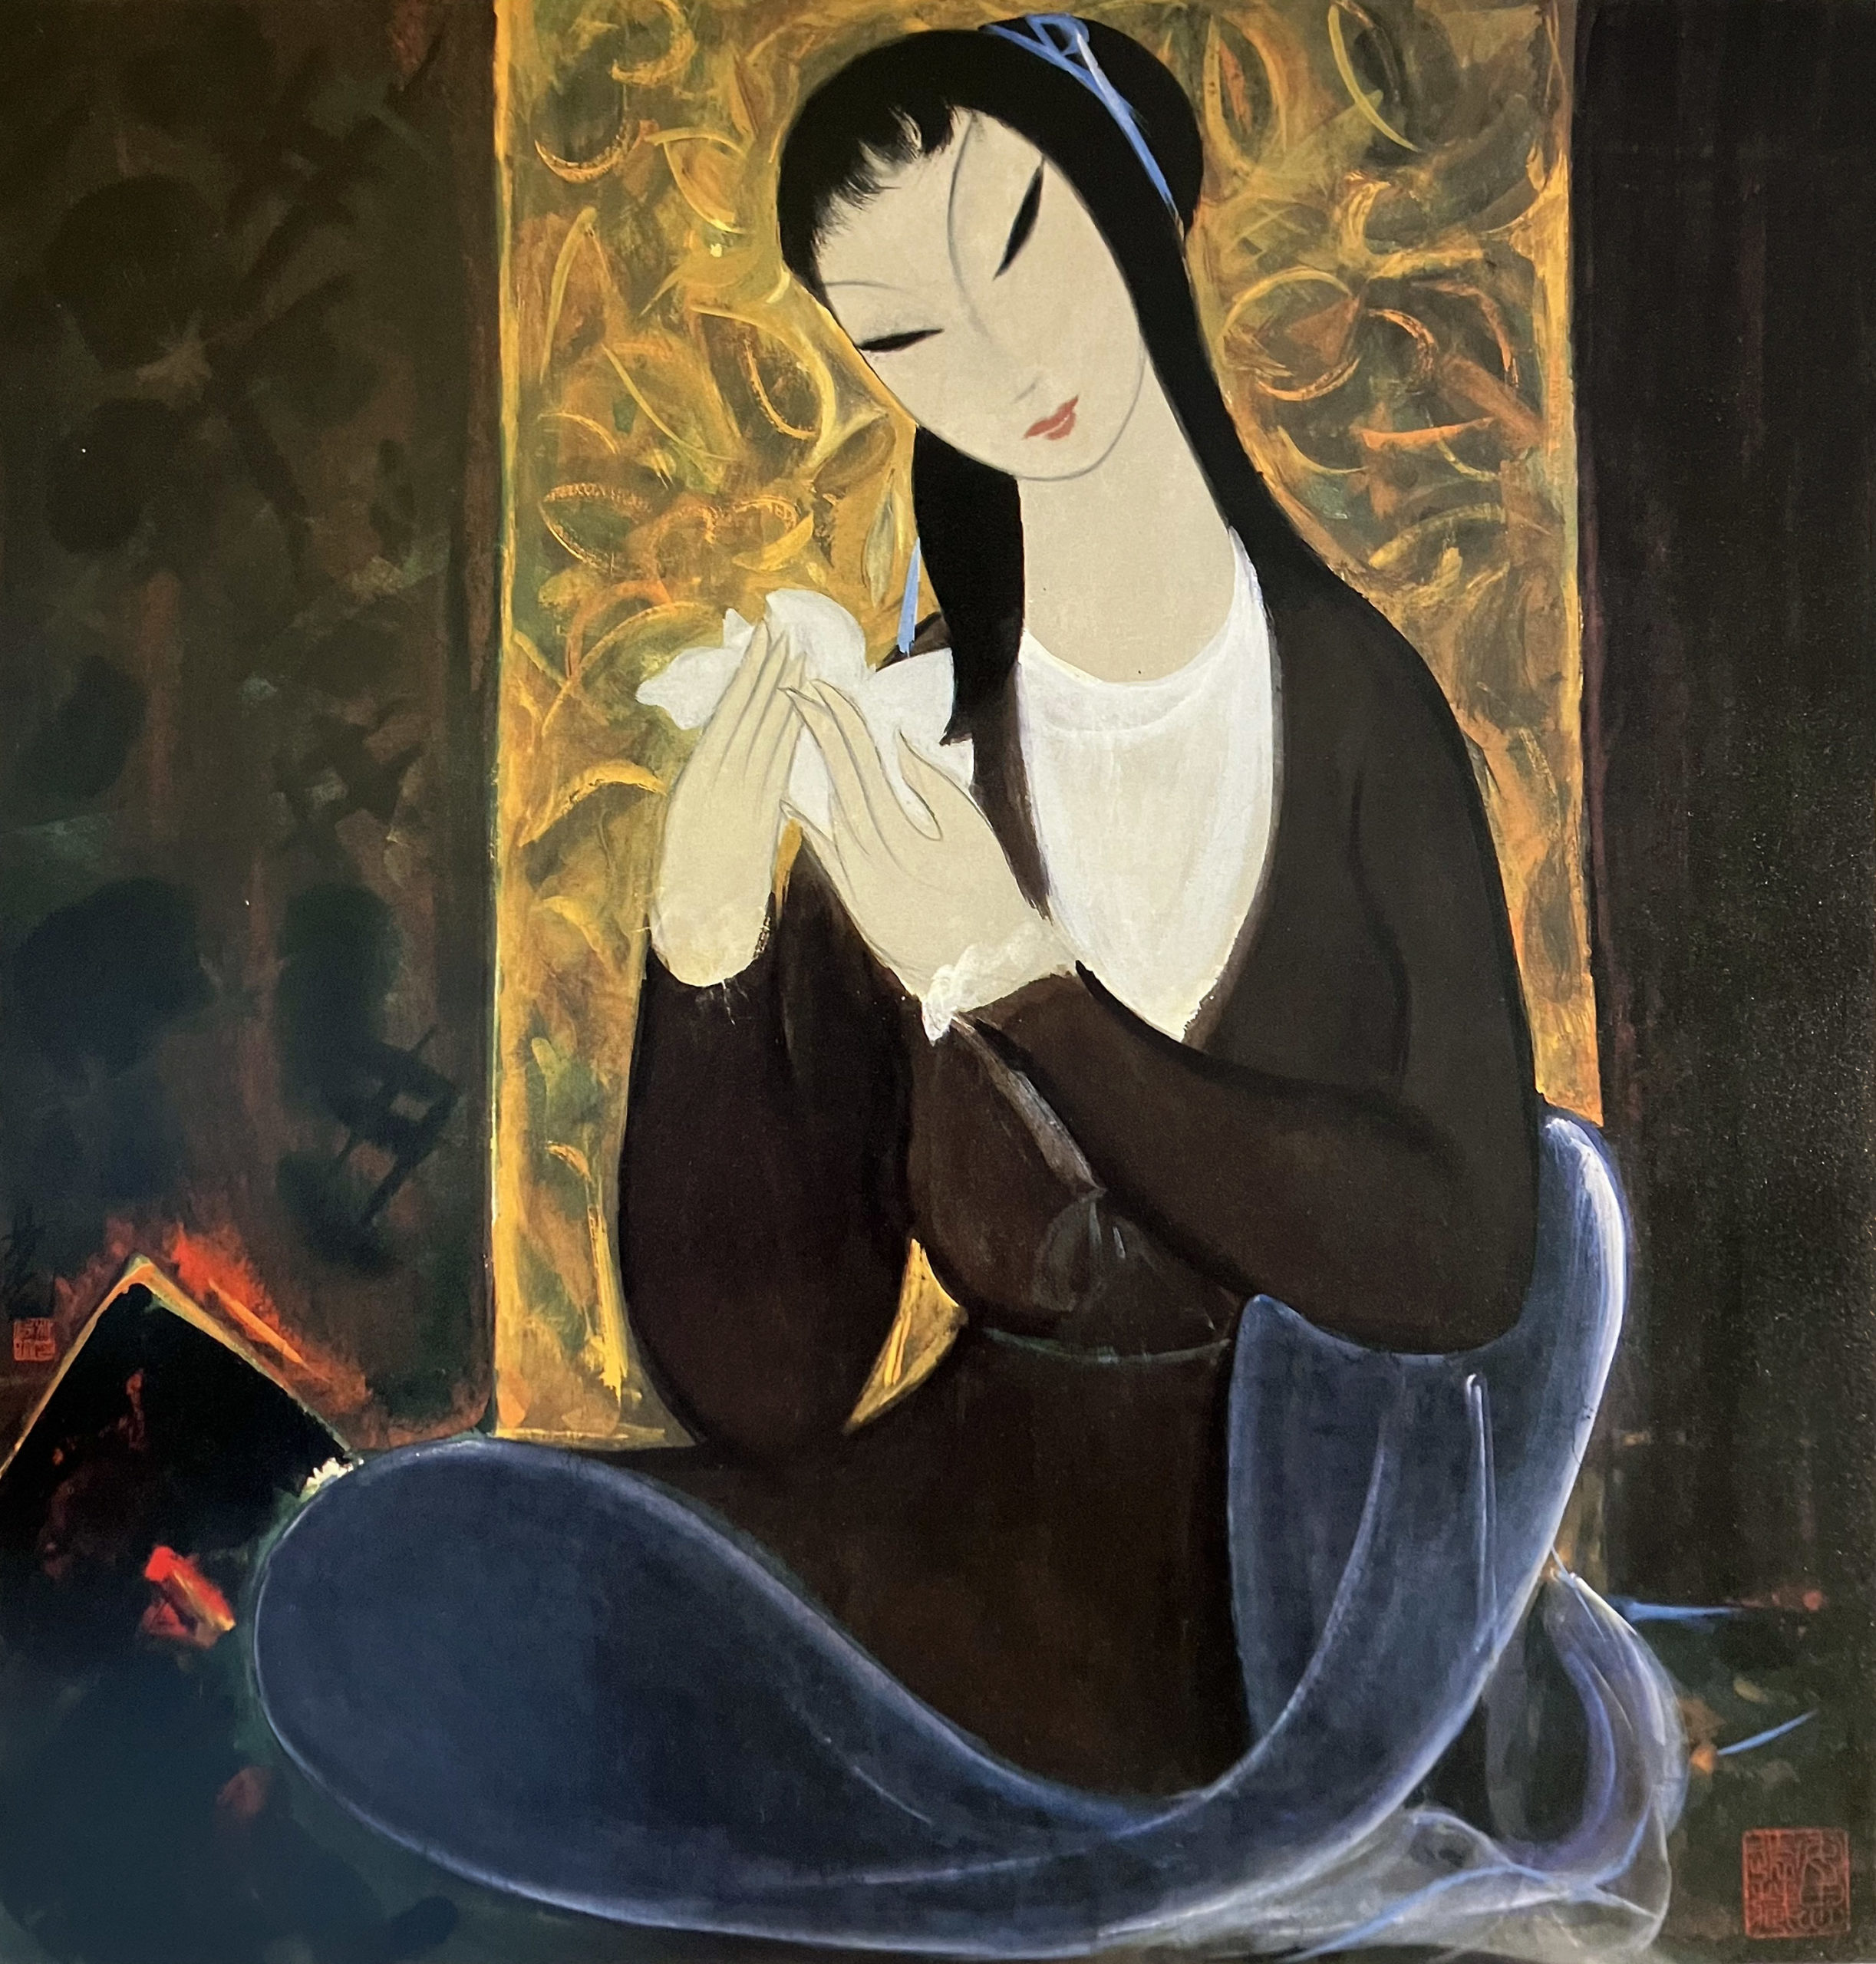 Lin Fengmian, Seated Woman, late 1970s, ink and color on paper (hanging scroll), China, 68.6 x 65.4 cm (The Metropolitan Museum of Art)